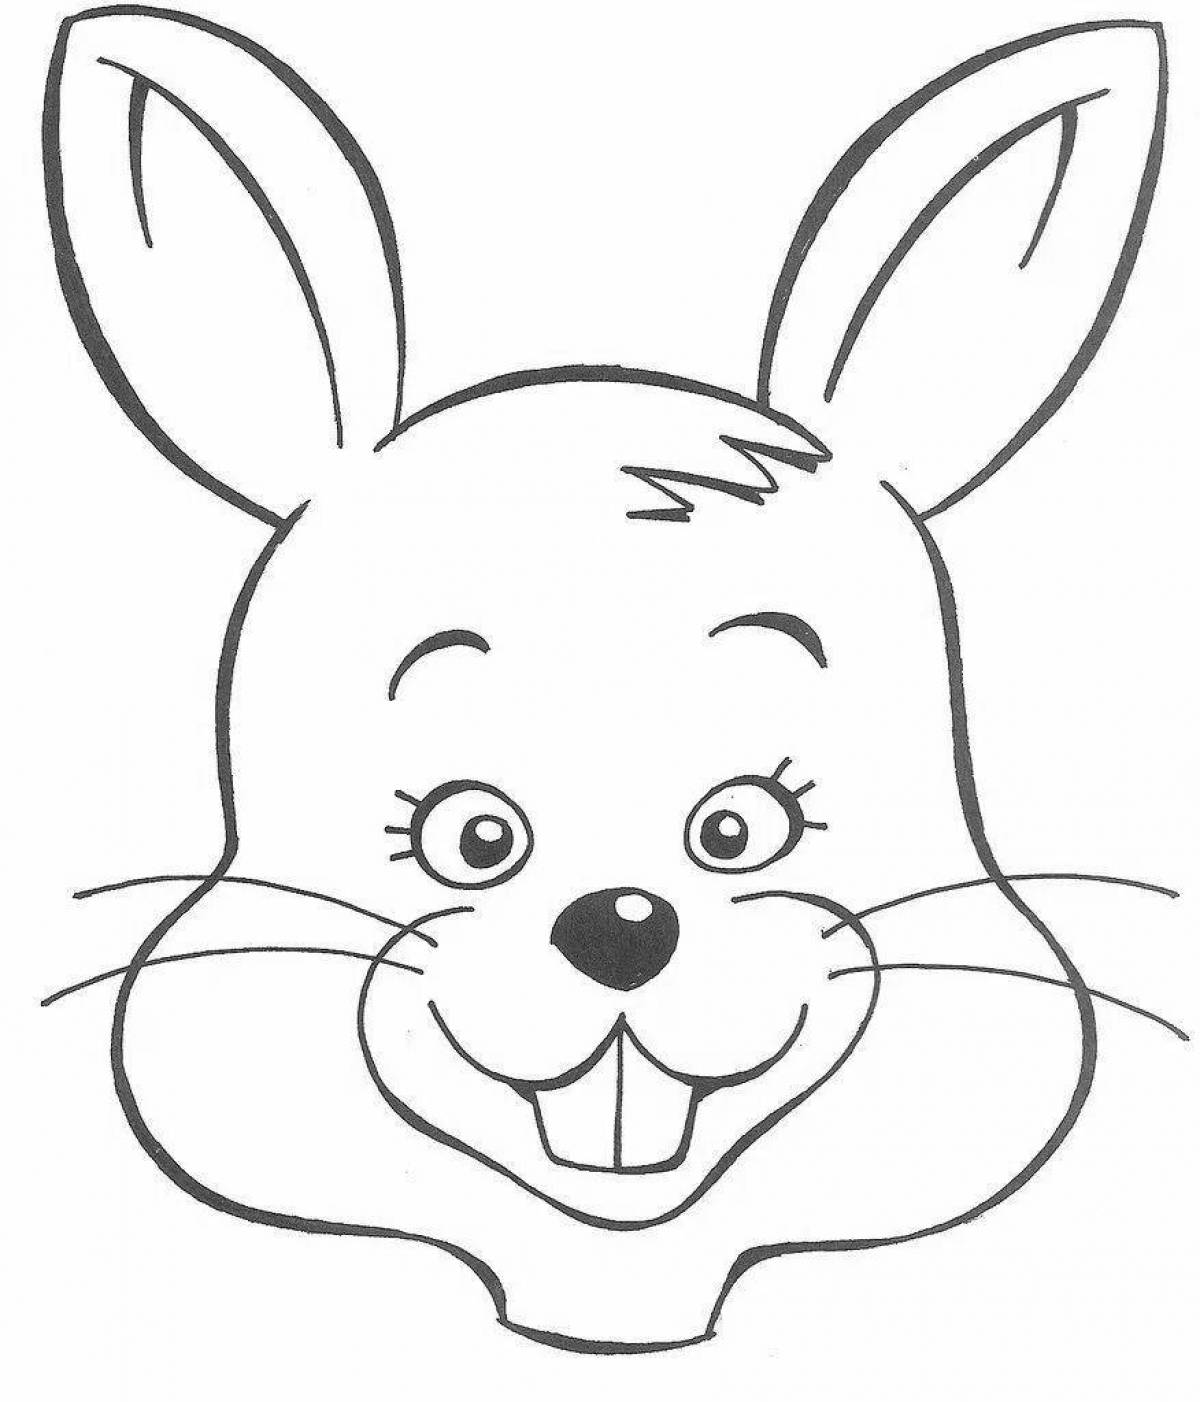 Fun hare face coloring page